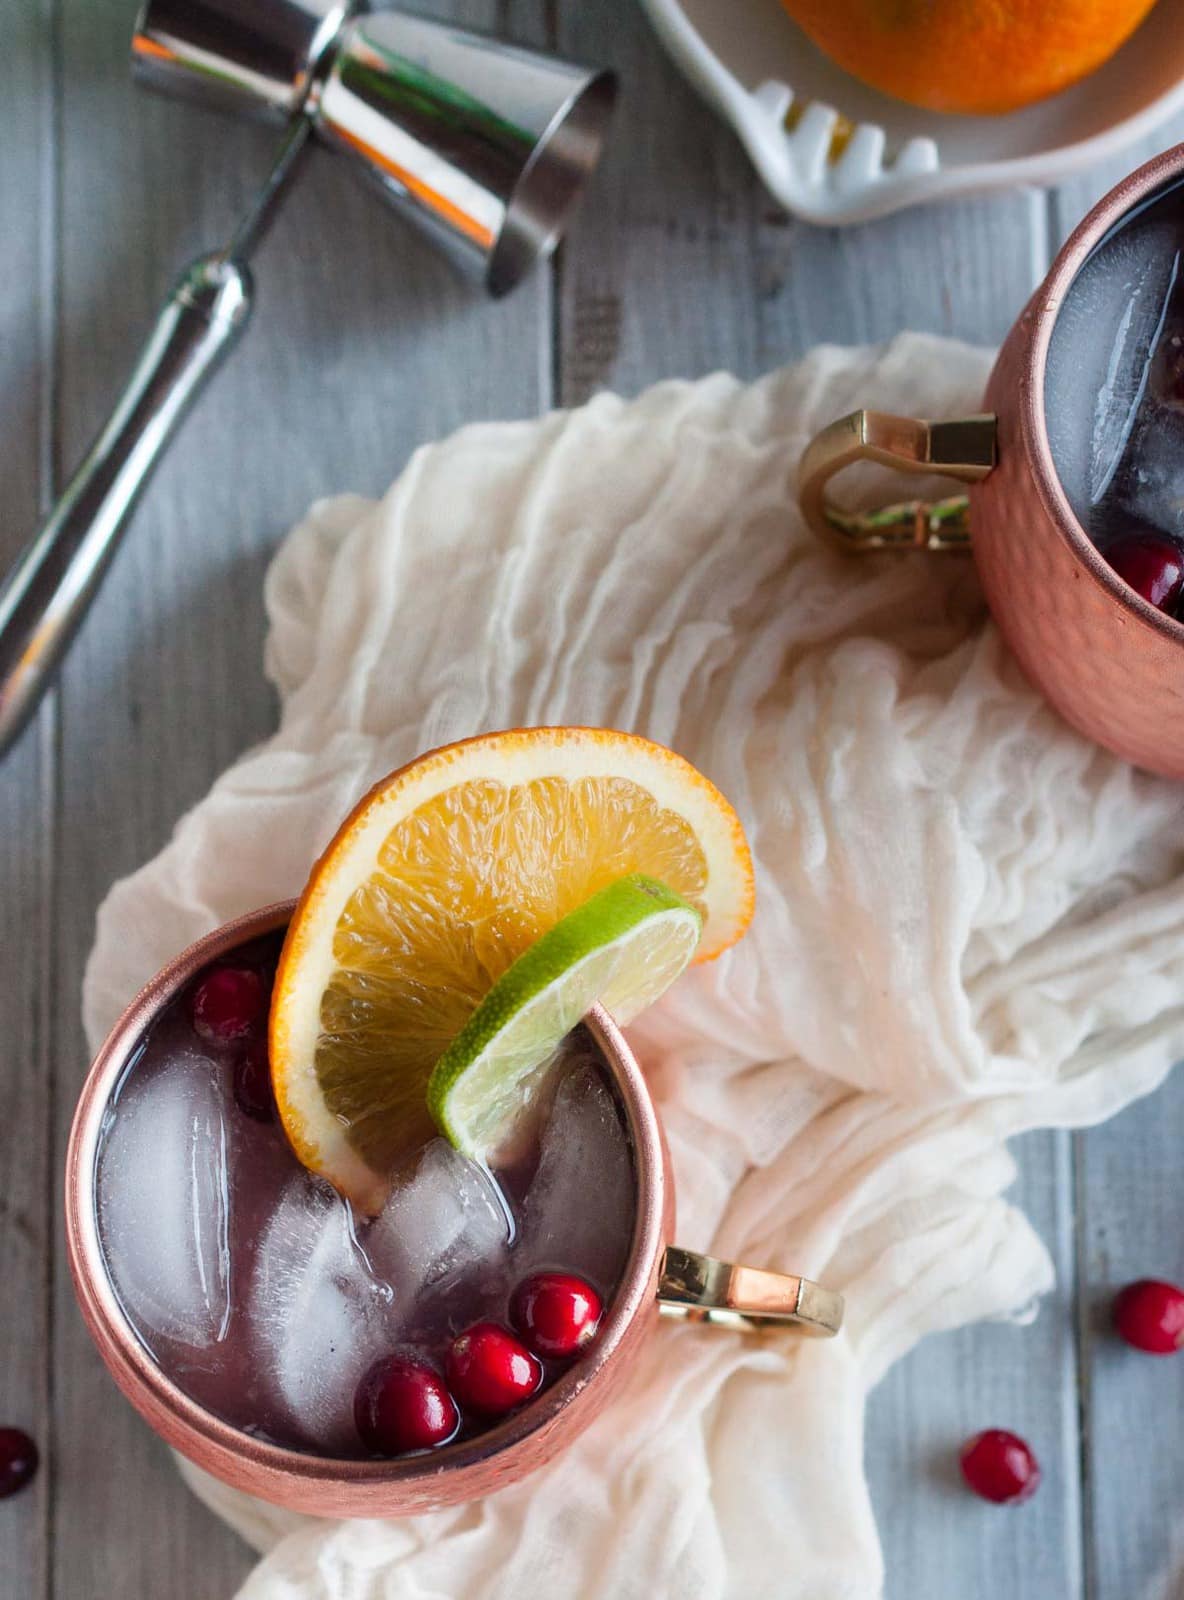 Cranberry Moscow mule recipe made with zesty orange, zippy ginger beer, vodka, lime, and cranberry just might be the most refreshing drink on the planet. Try one today!